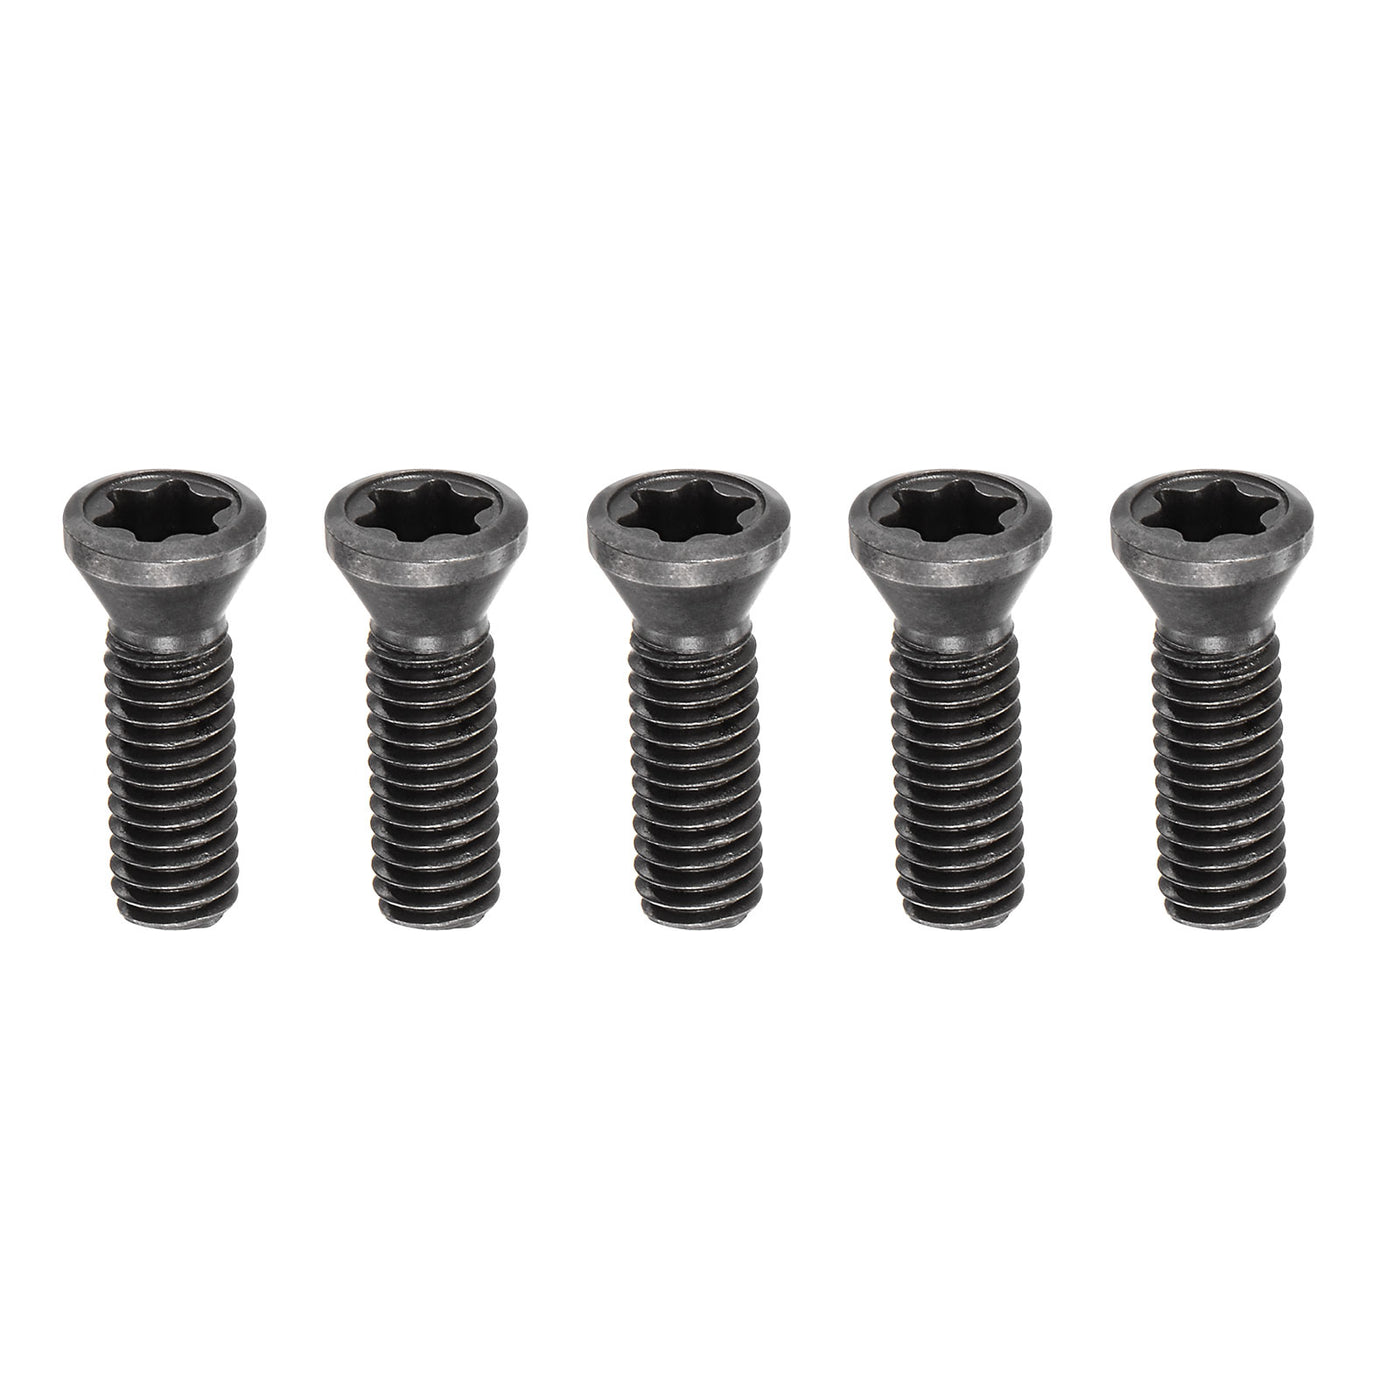 Uxcell Uxcell M3.5-0.6 Torx Set Screws for Carbide Insert Lathe Turning Tool Holder, 3Pcs